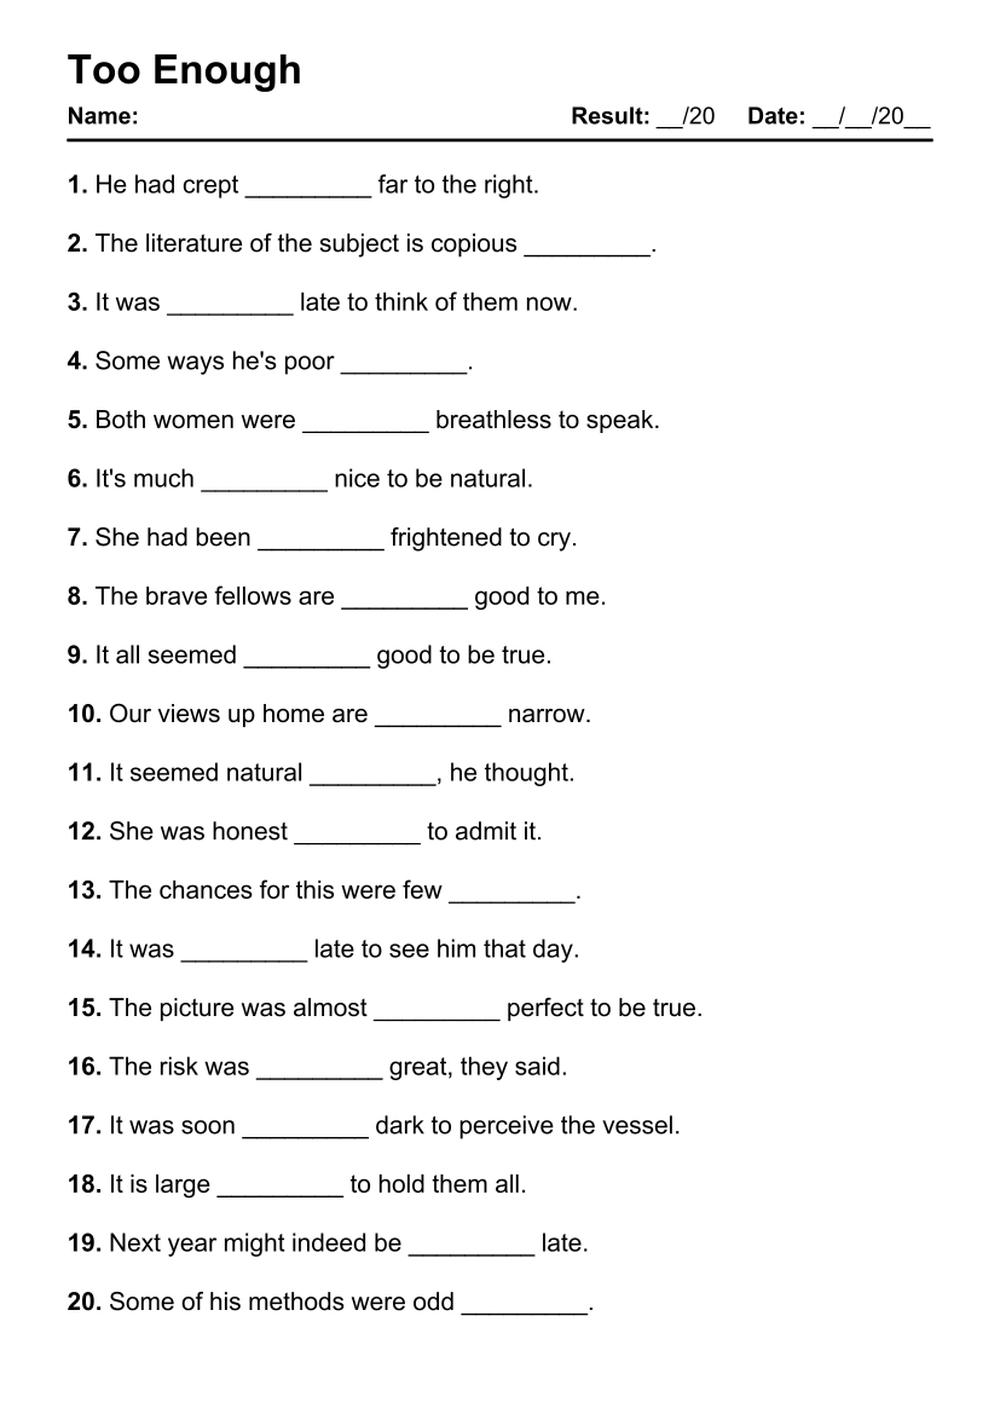 Printable Too Enough Exercises - PDF Worksheet with Answers - Test 13